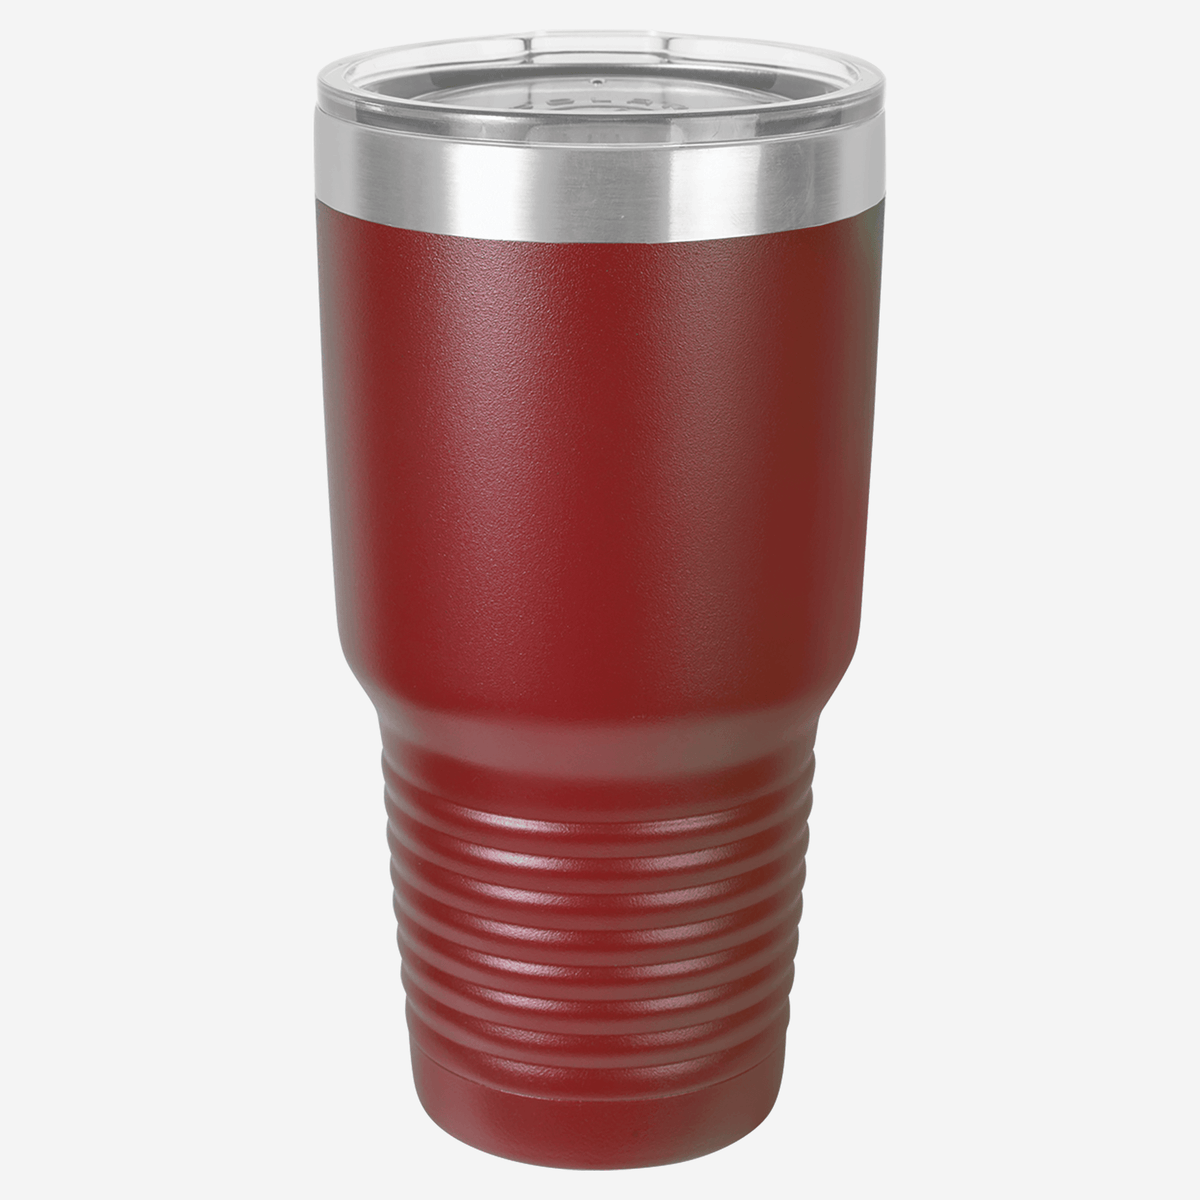 30 oz. maroon stainless steel tumbler with silver ring at top clear lid